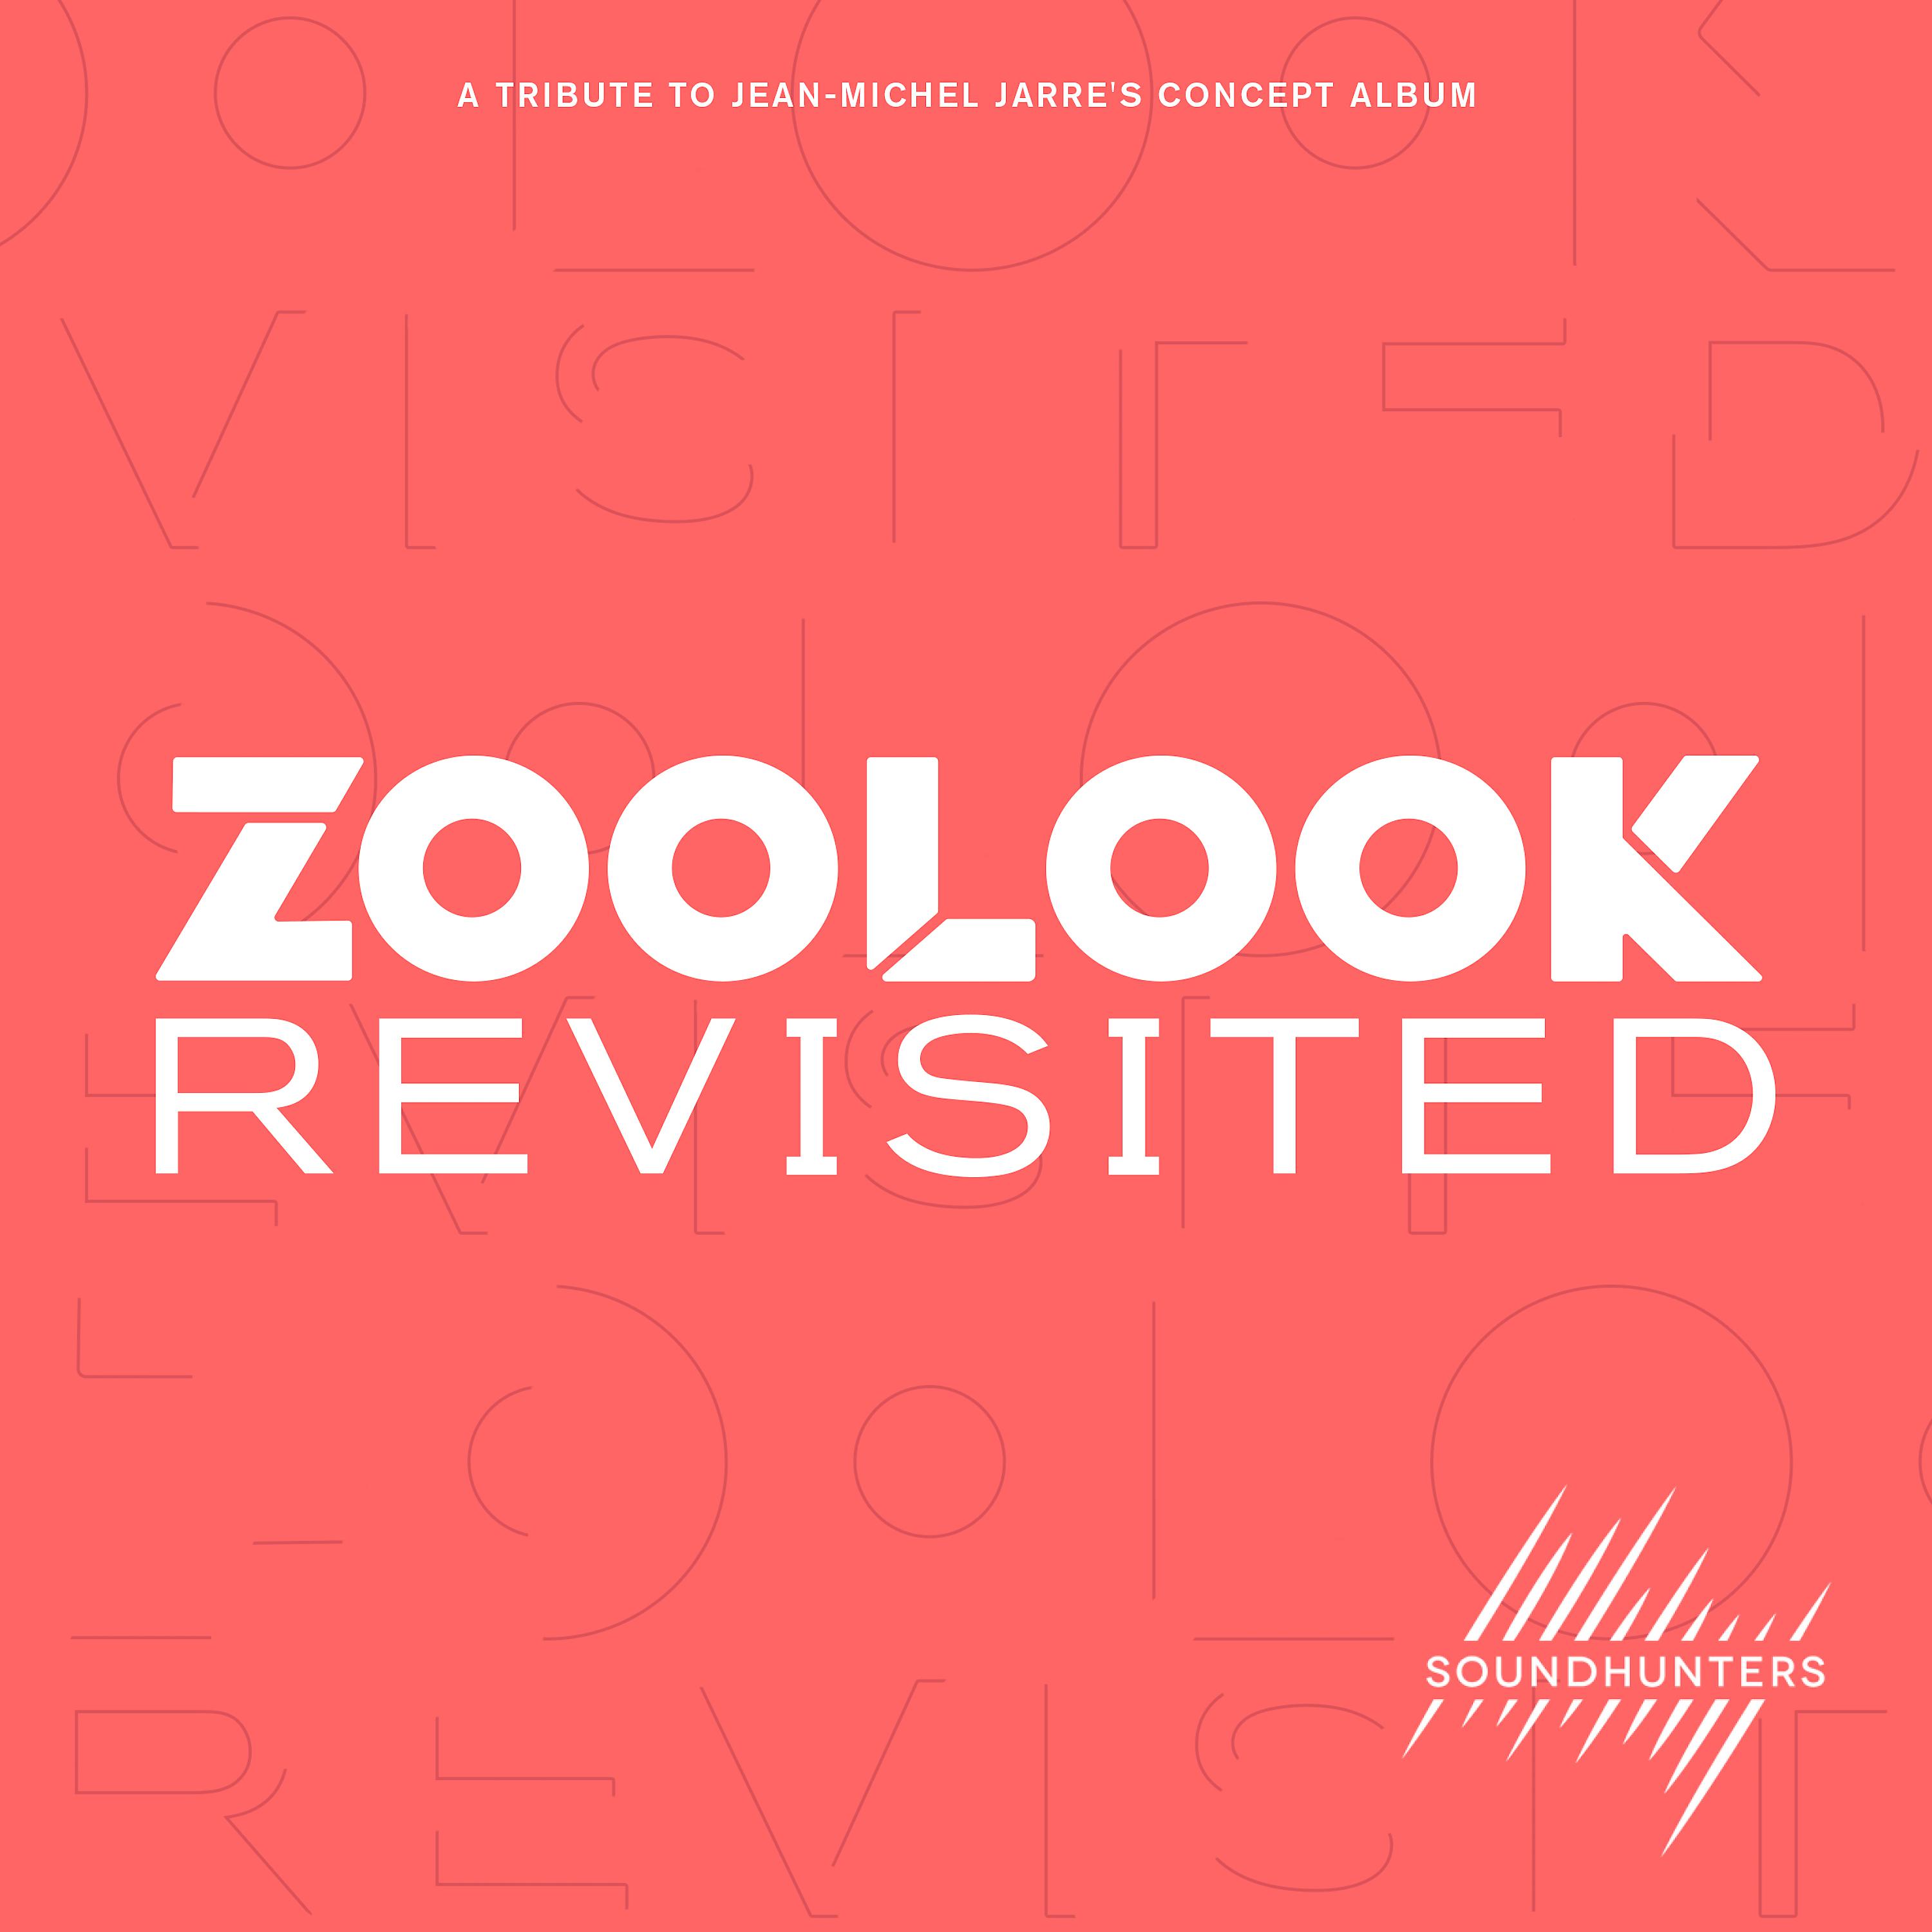 Постер альбома Zoolook Revisited (A Tribute to Jean-Michel Jarre's Concept Album)